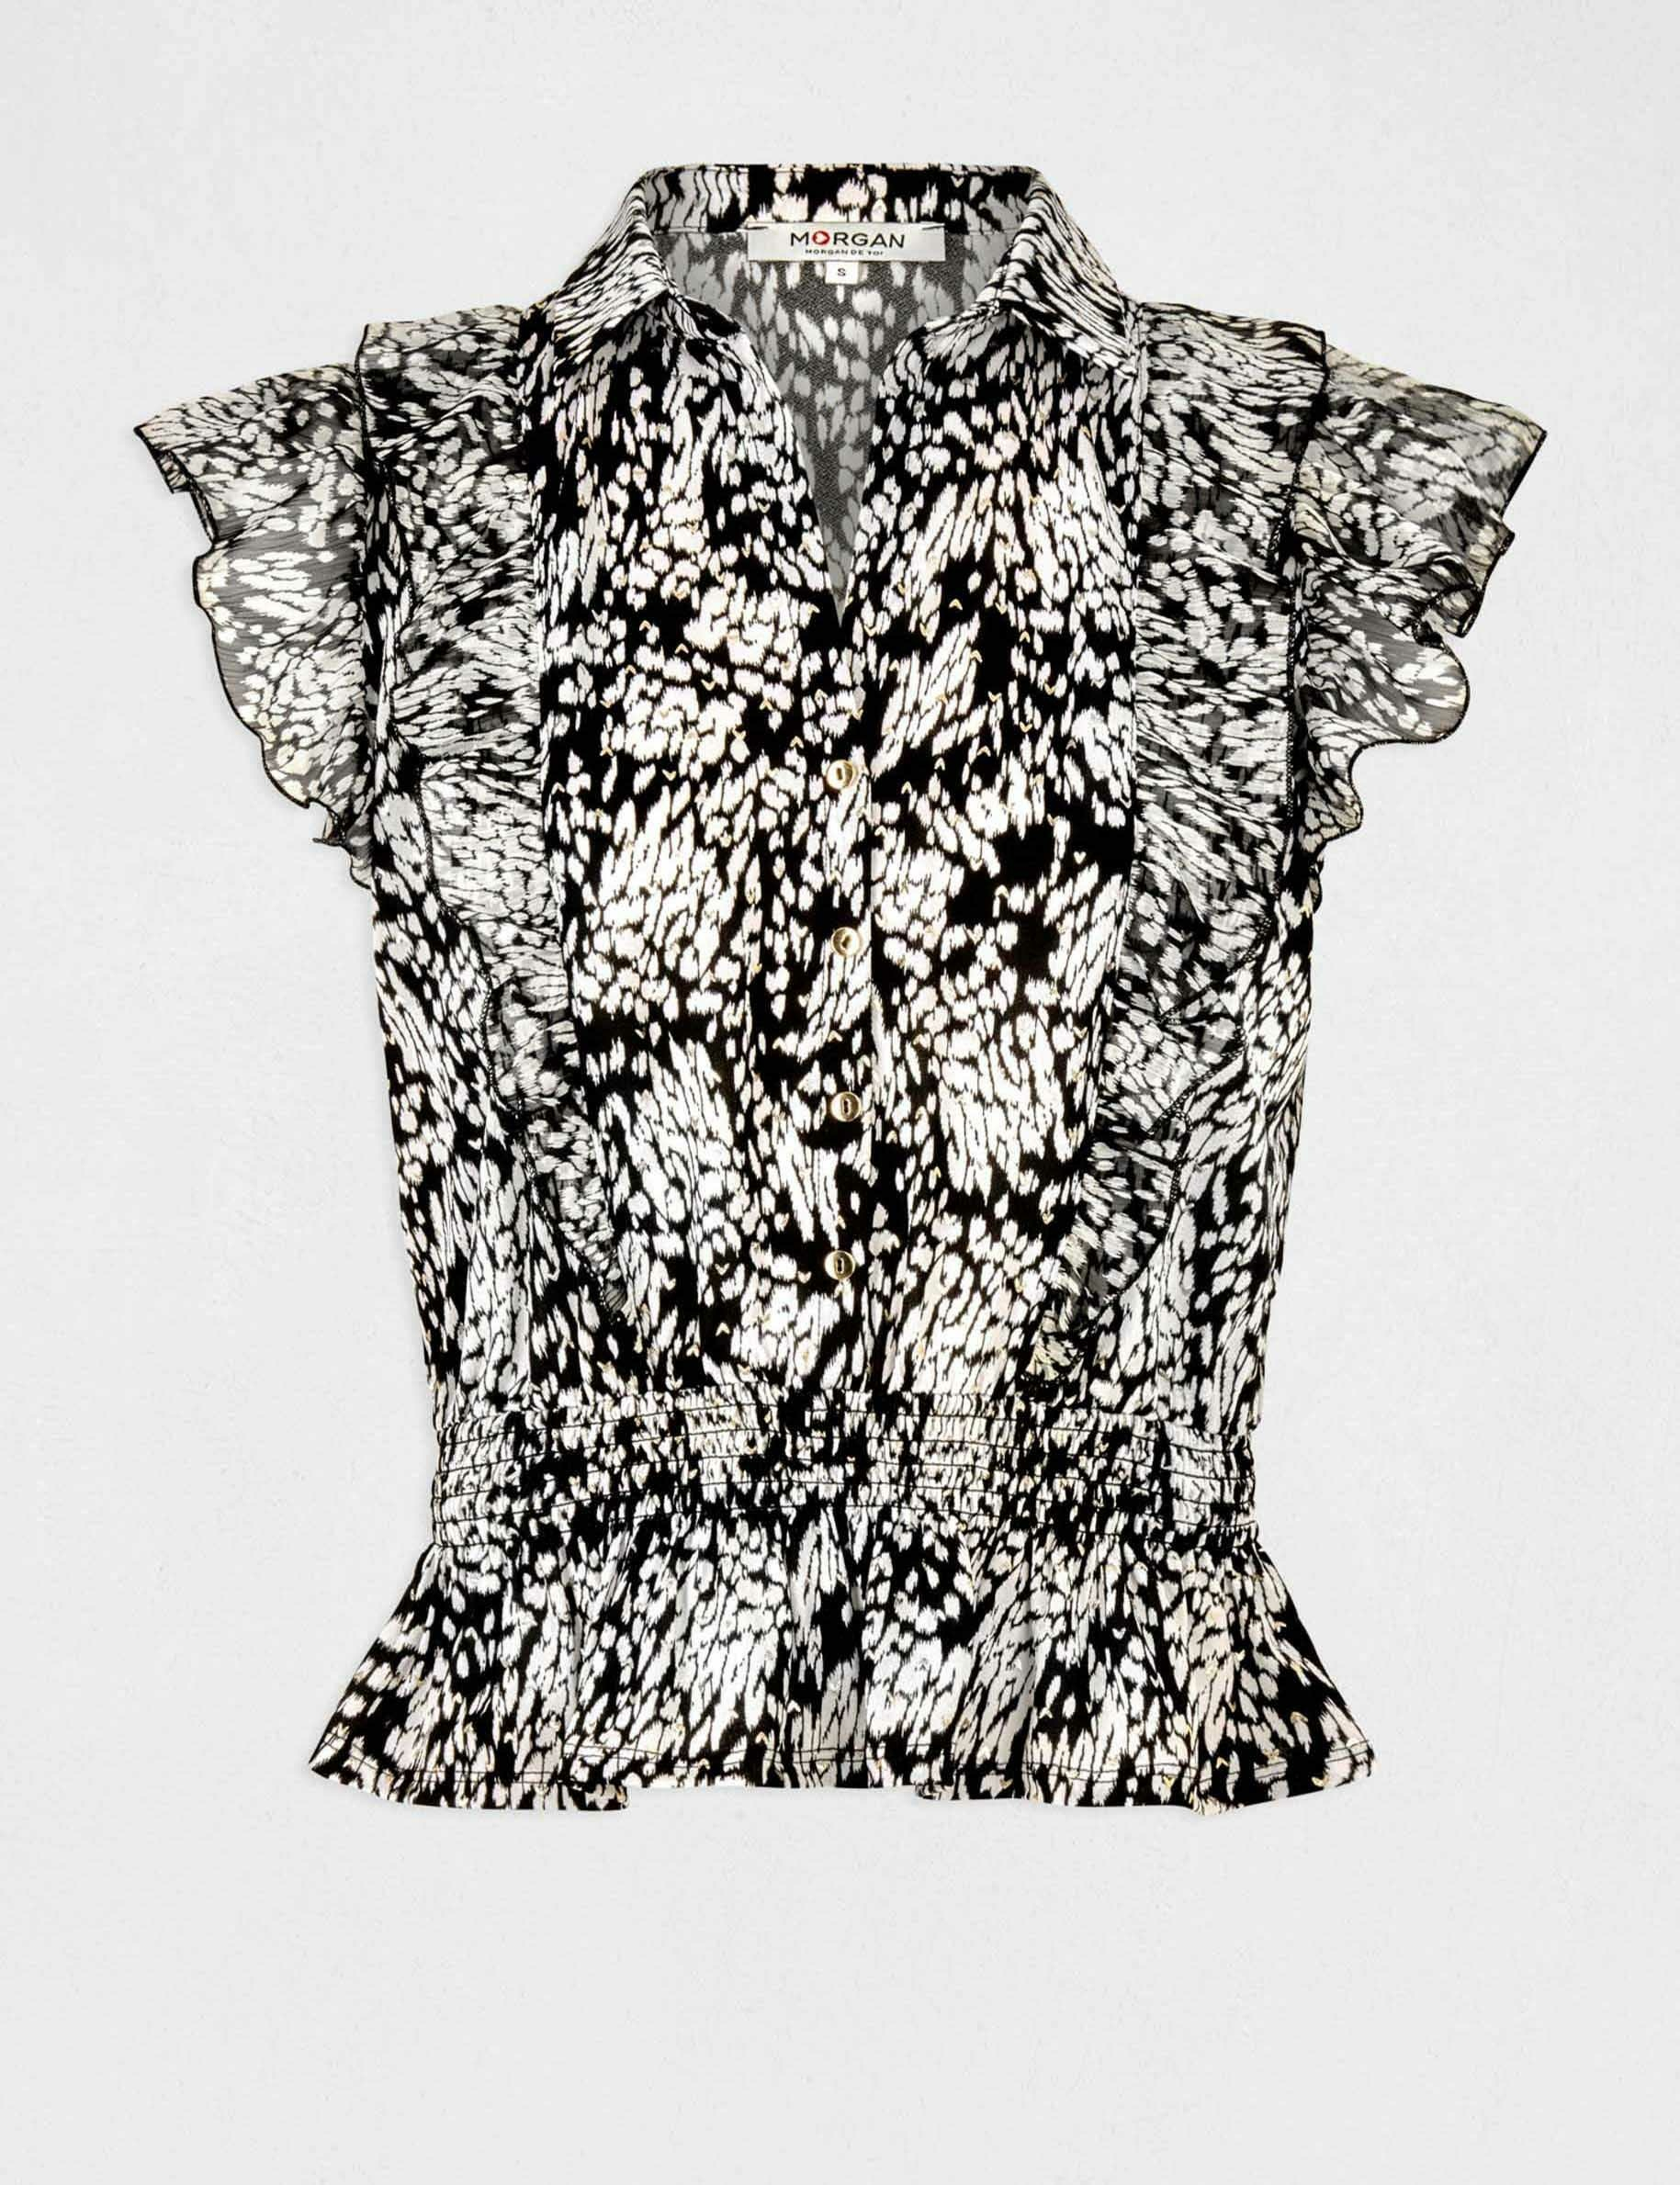 Short-sleeved t-shirt abstract print multico ladies'